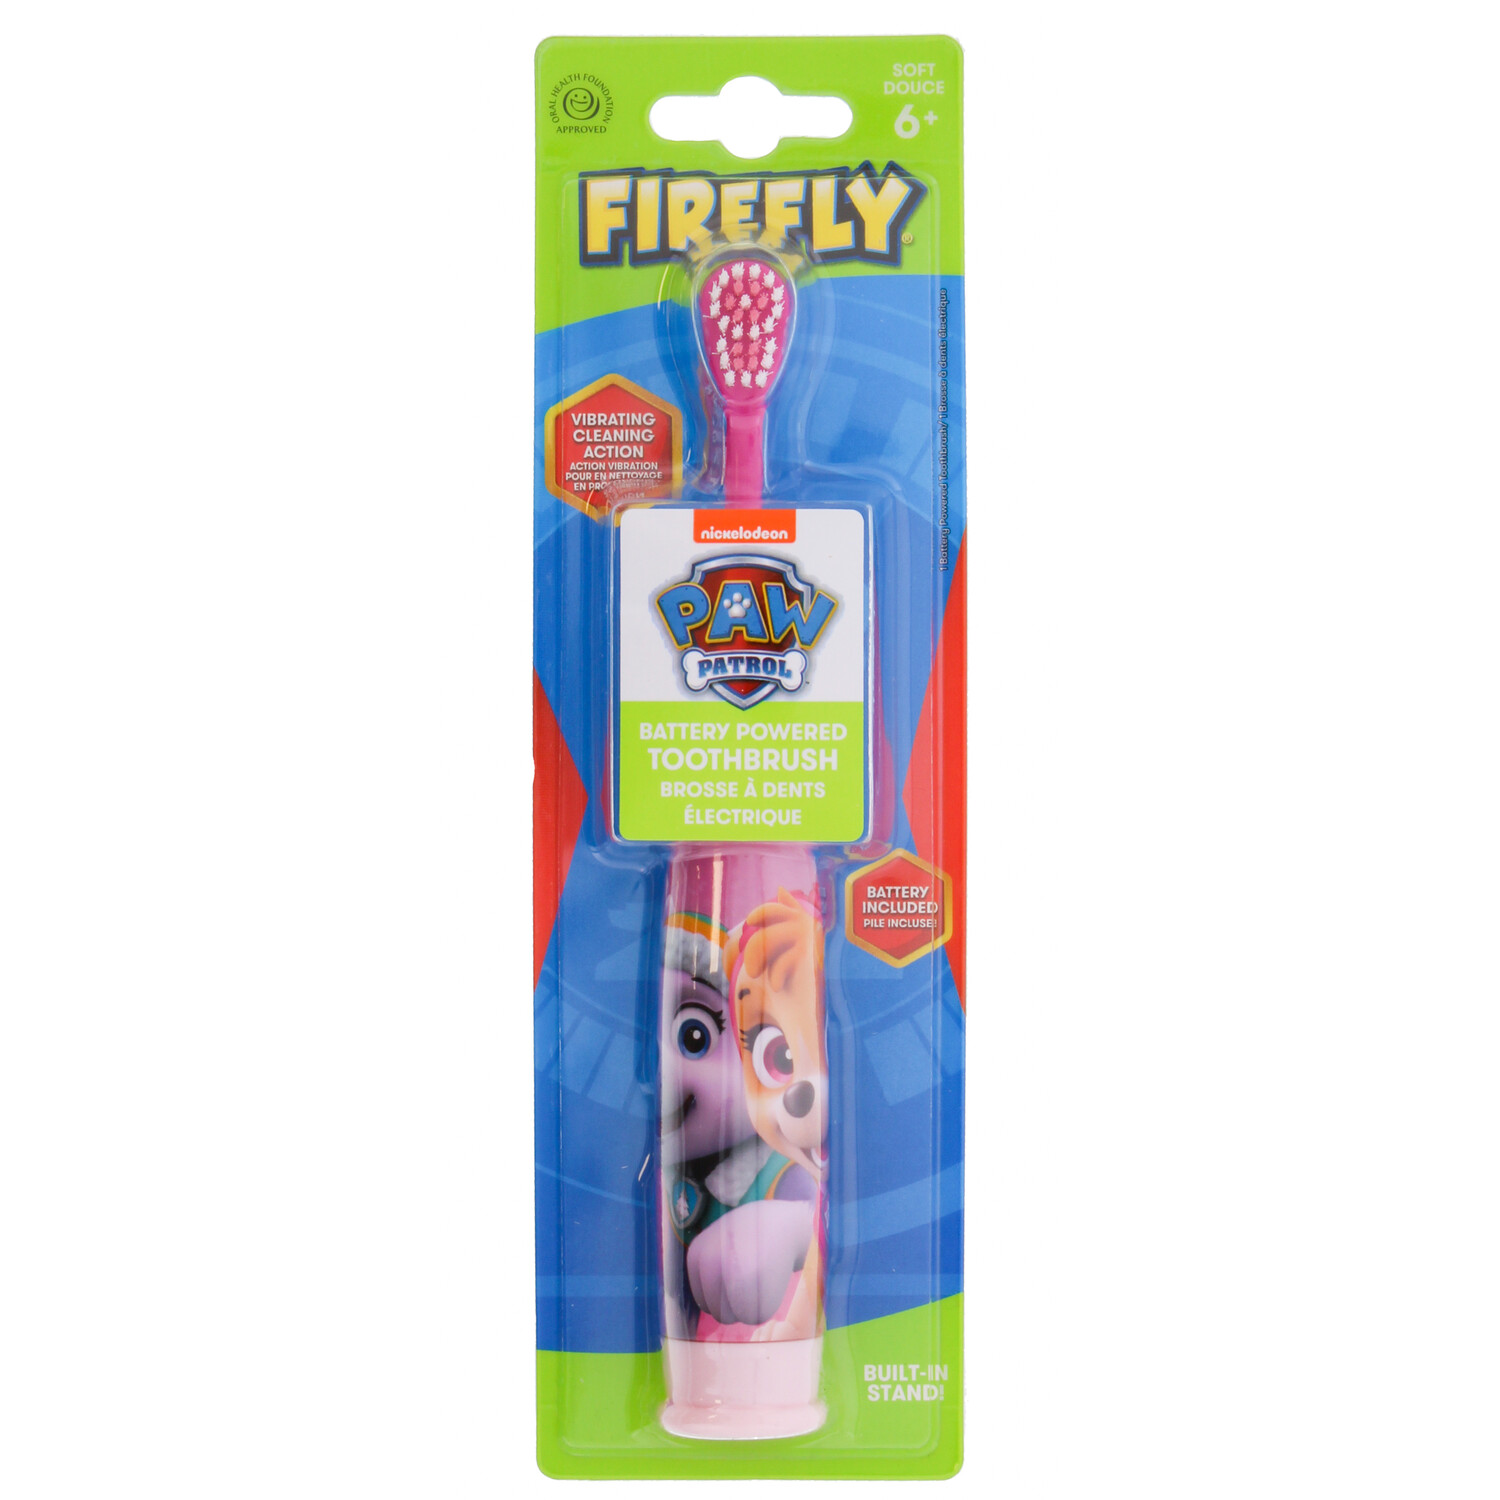 Firefly Play Action Sonic the Hedgehog Battery Powered Toothbrush Kit